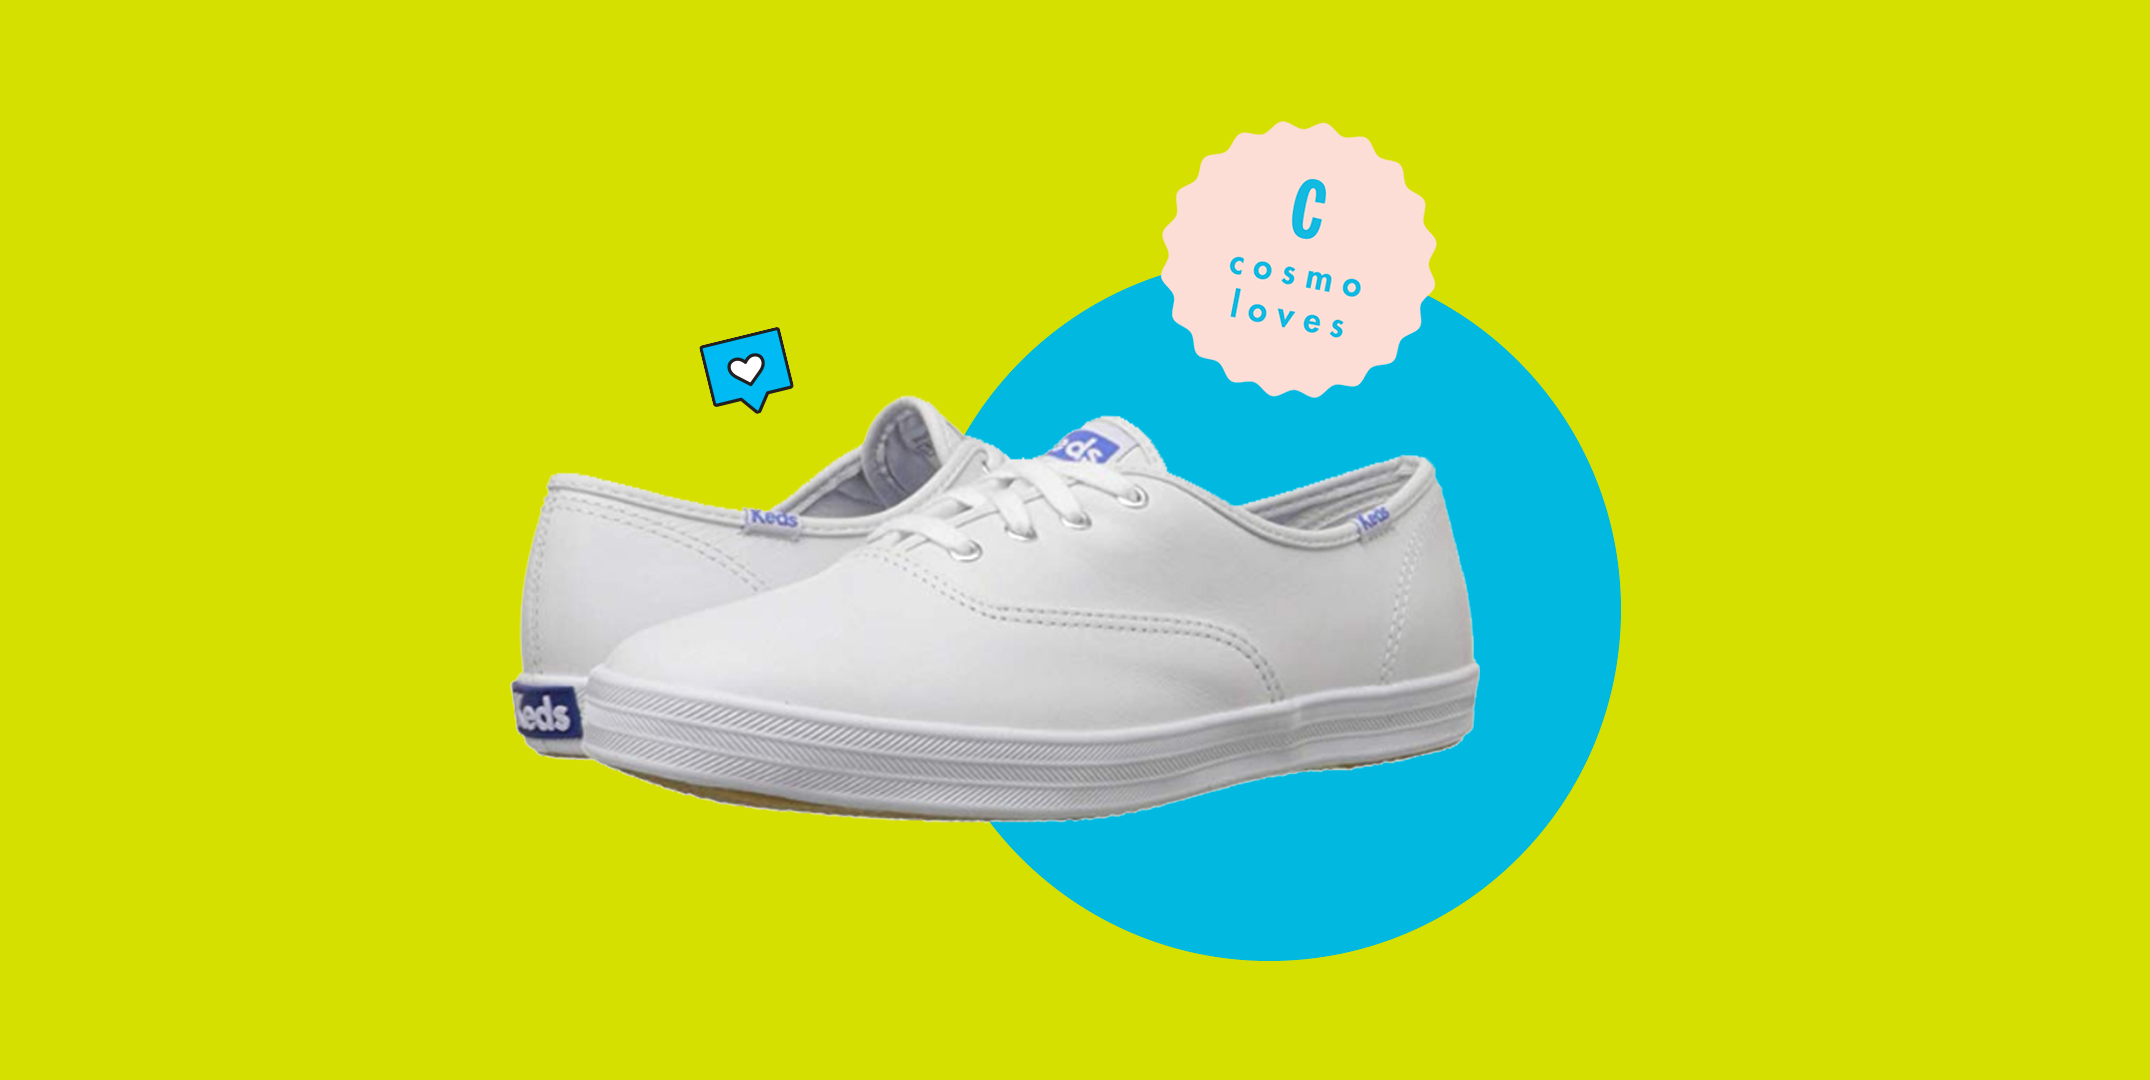 Keds Leather Sneakers Review Best White